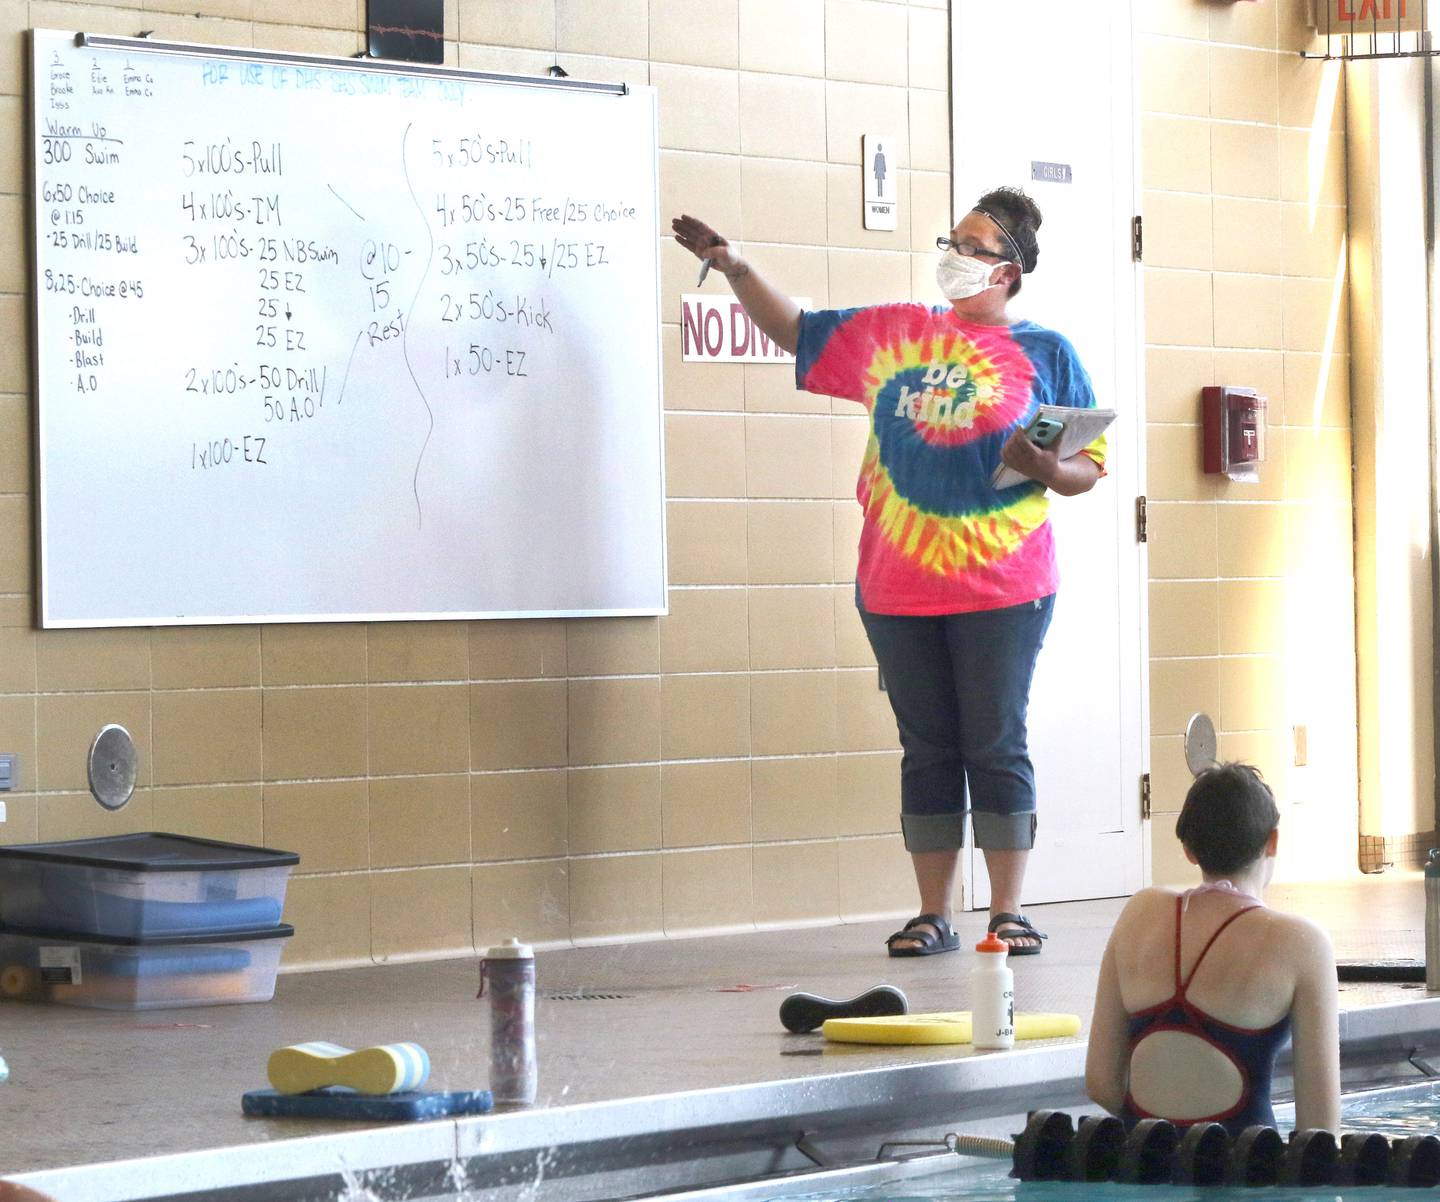 DeKalb-Sycamore girls swimming coach Melanie Chambers talks to her team Friday afternoon during practice at the Huntley Middle School pool in DeKalb.